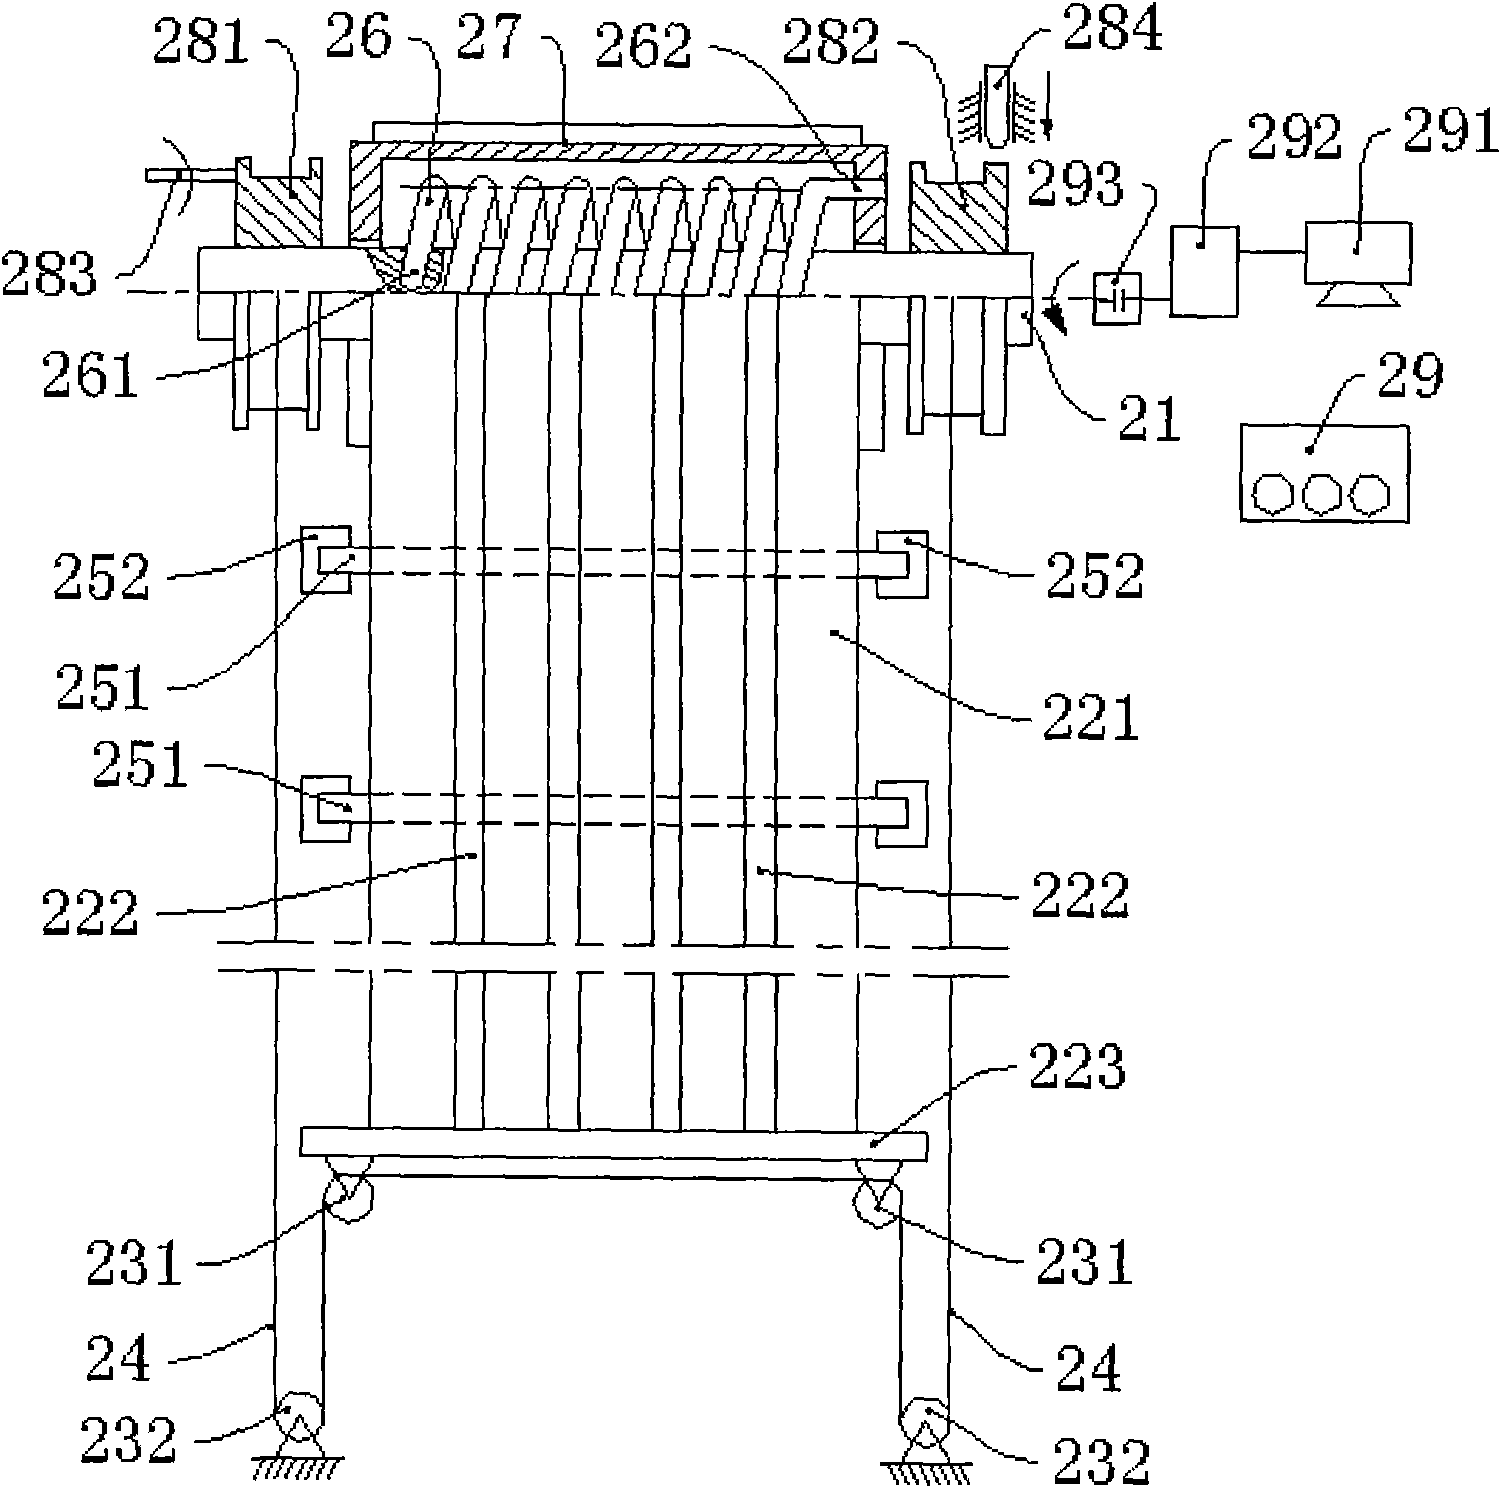 Sunshade device for large solar heat collector